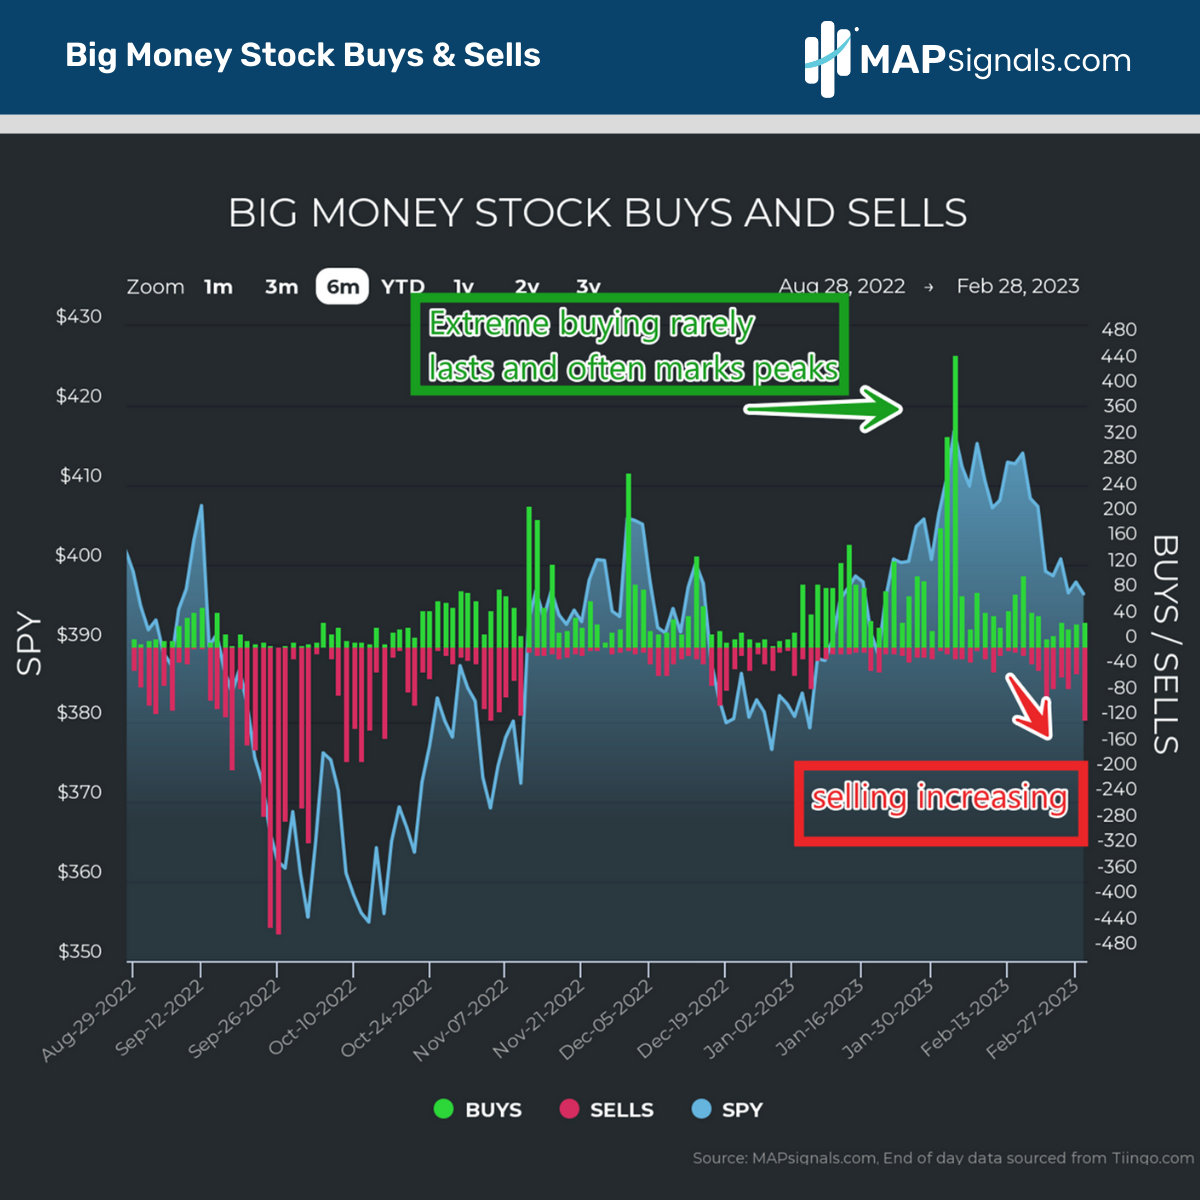 Selling Increases | Big Money Stock Buys & Sells